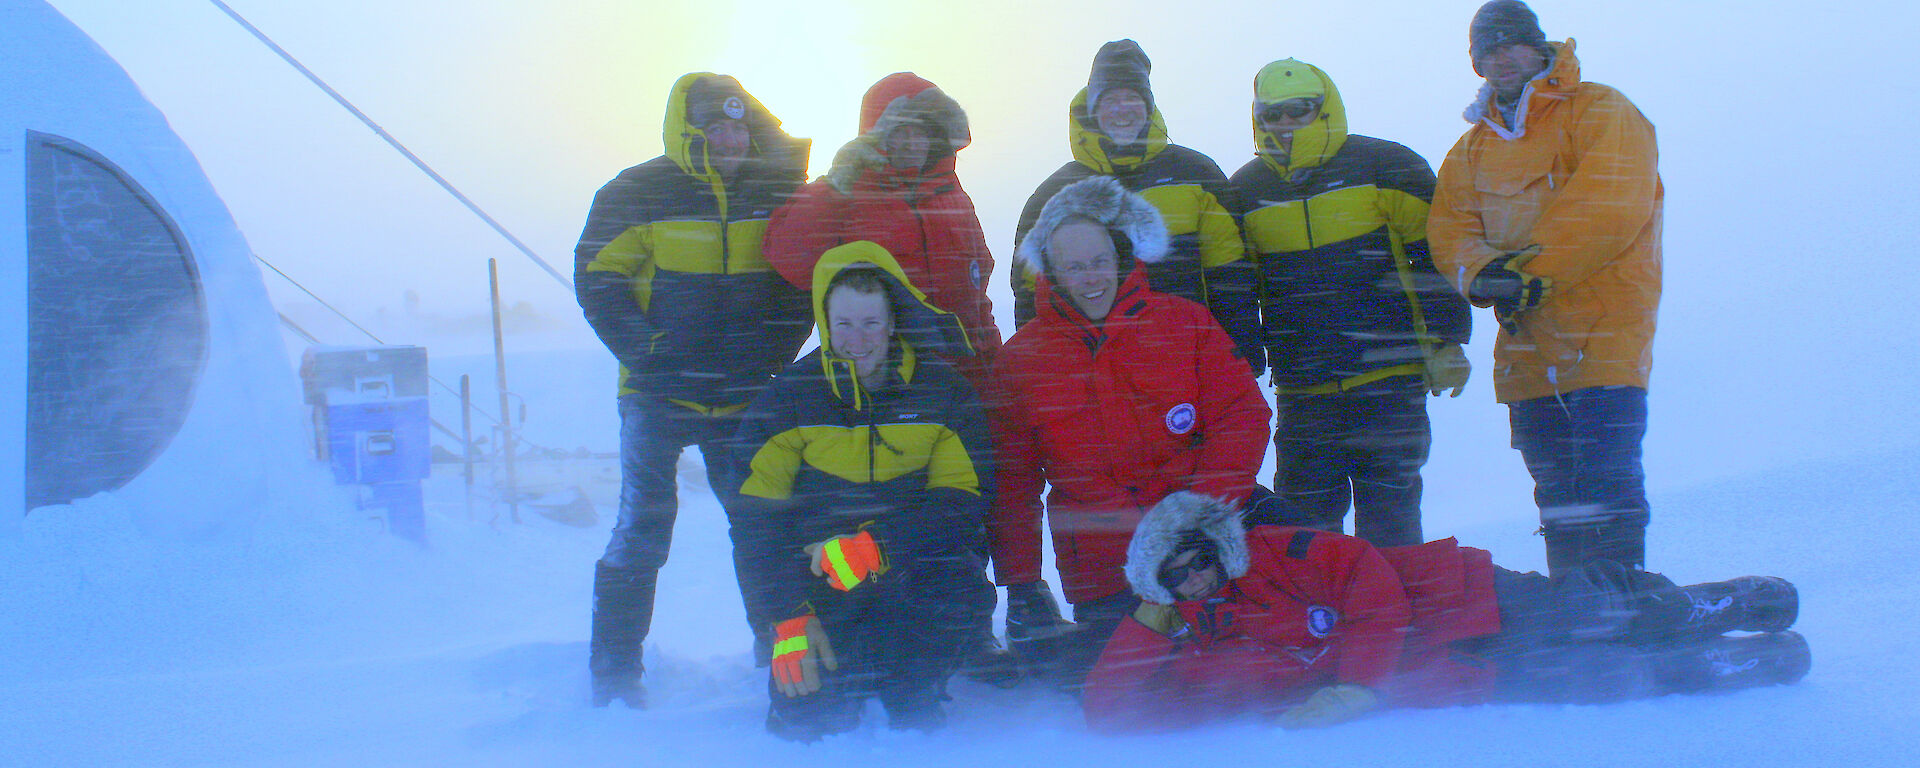 Ice core drilling team pose together in a blizzard at Law Dome